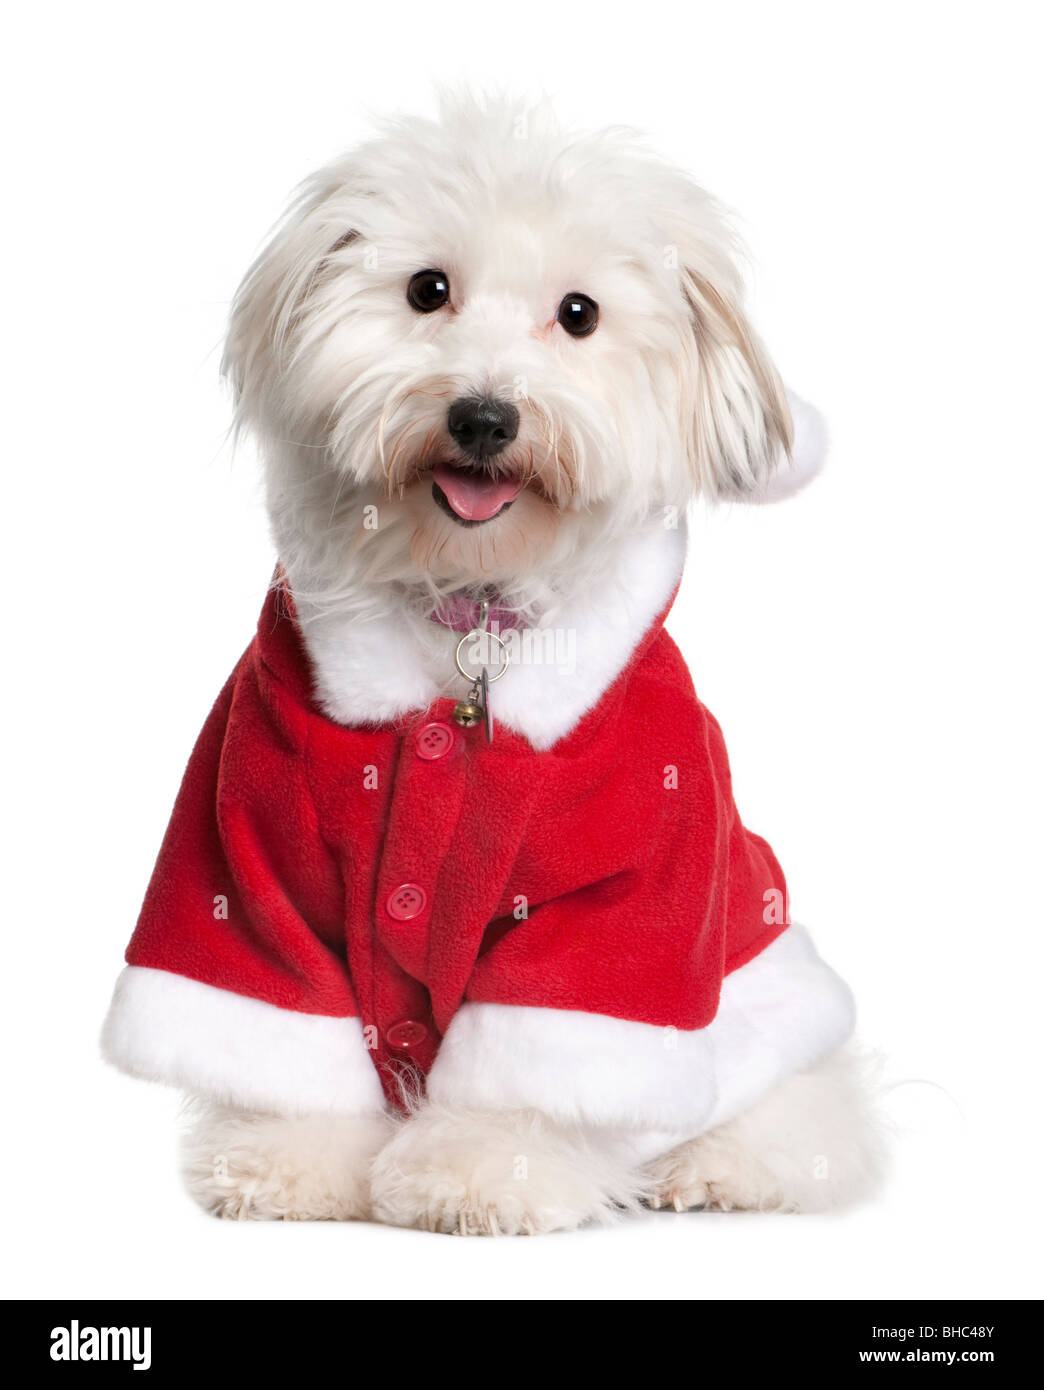 Coton de tulear dog in Santa outfit, 1 year old, sitting in front of white background Stock Photo